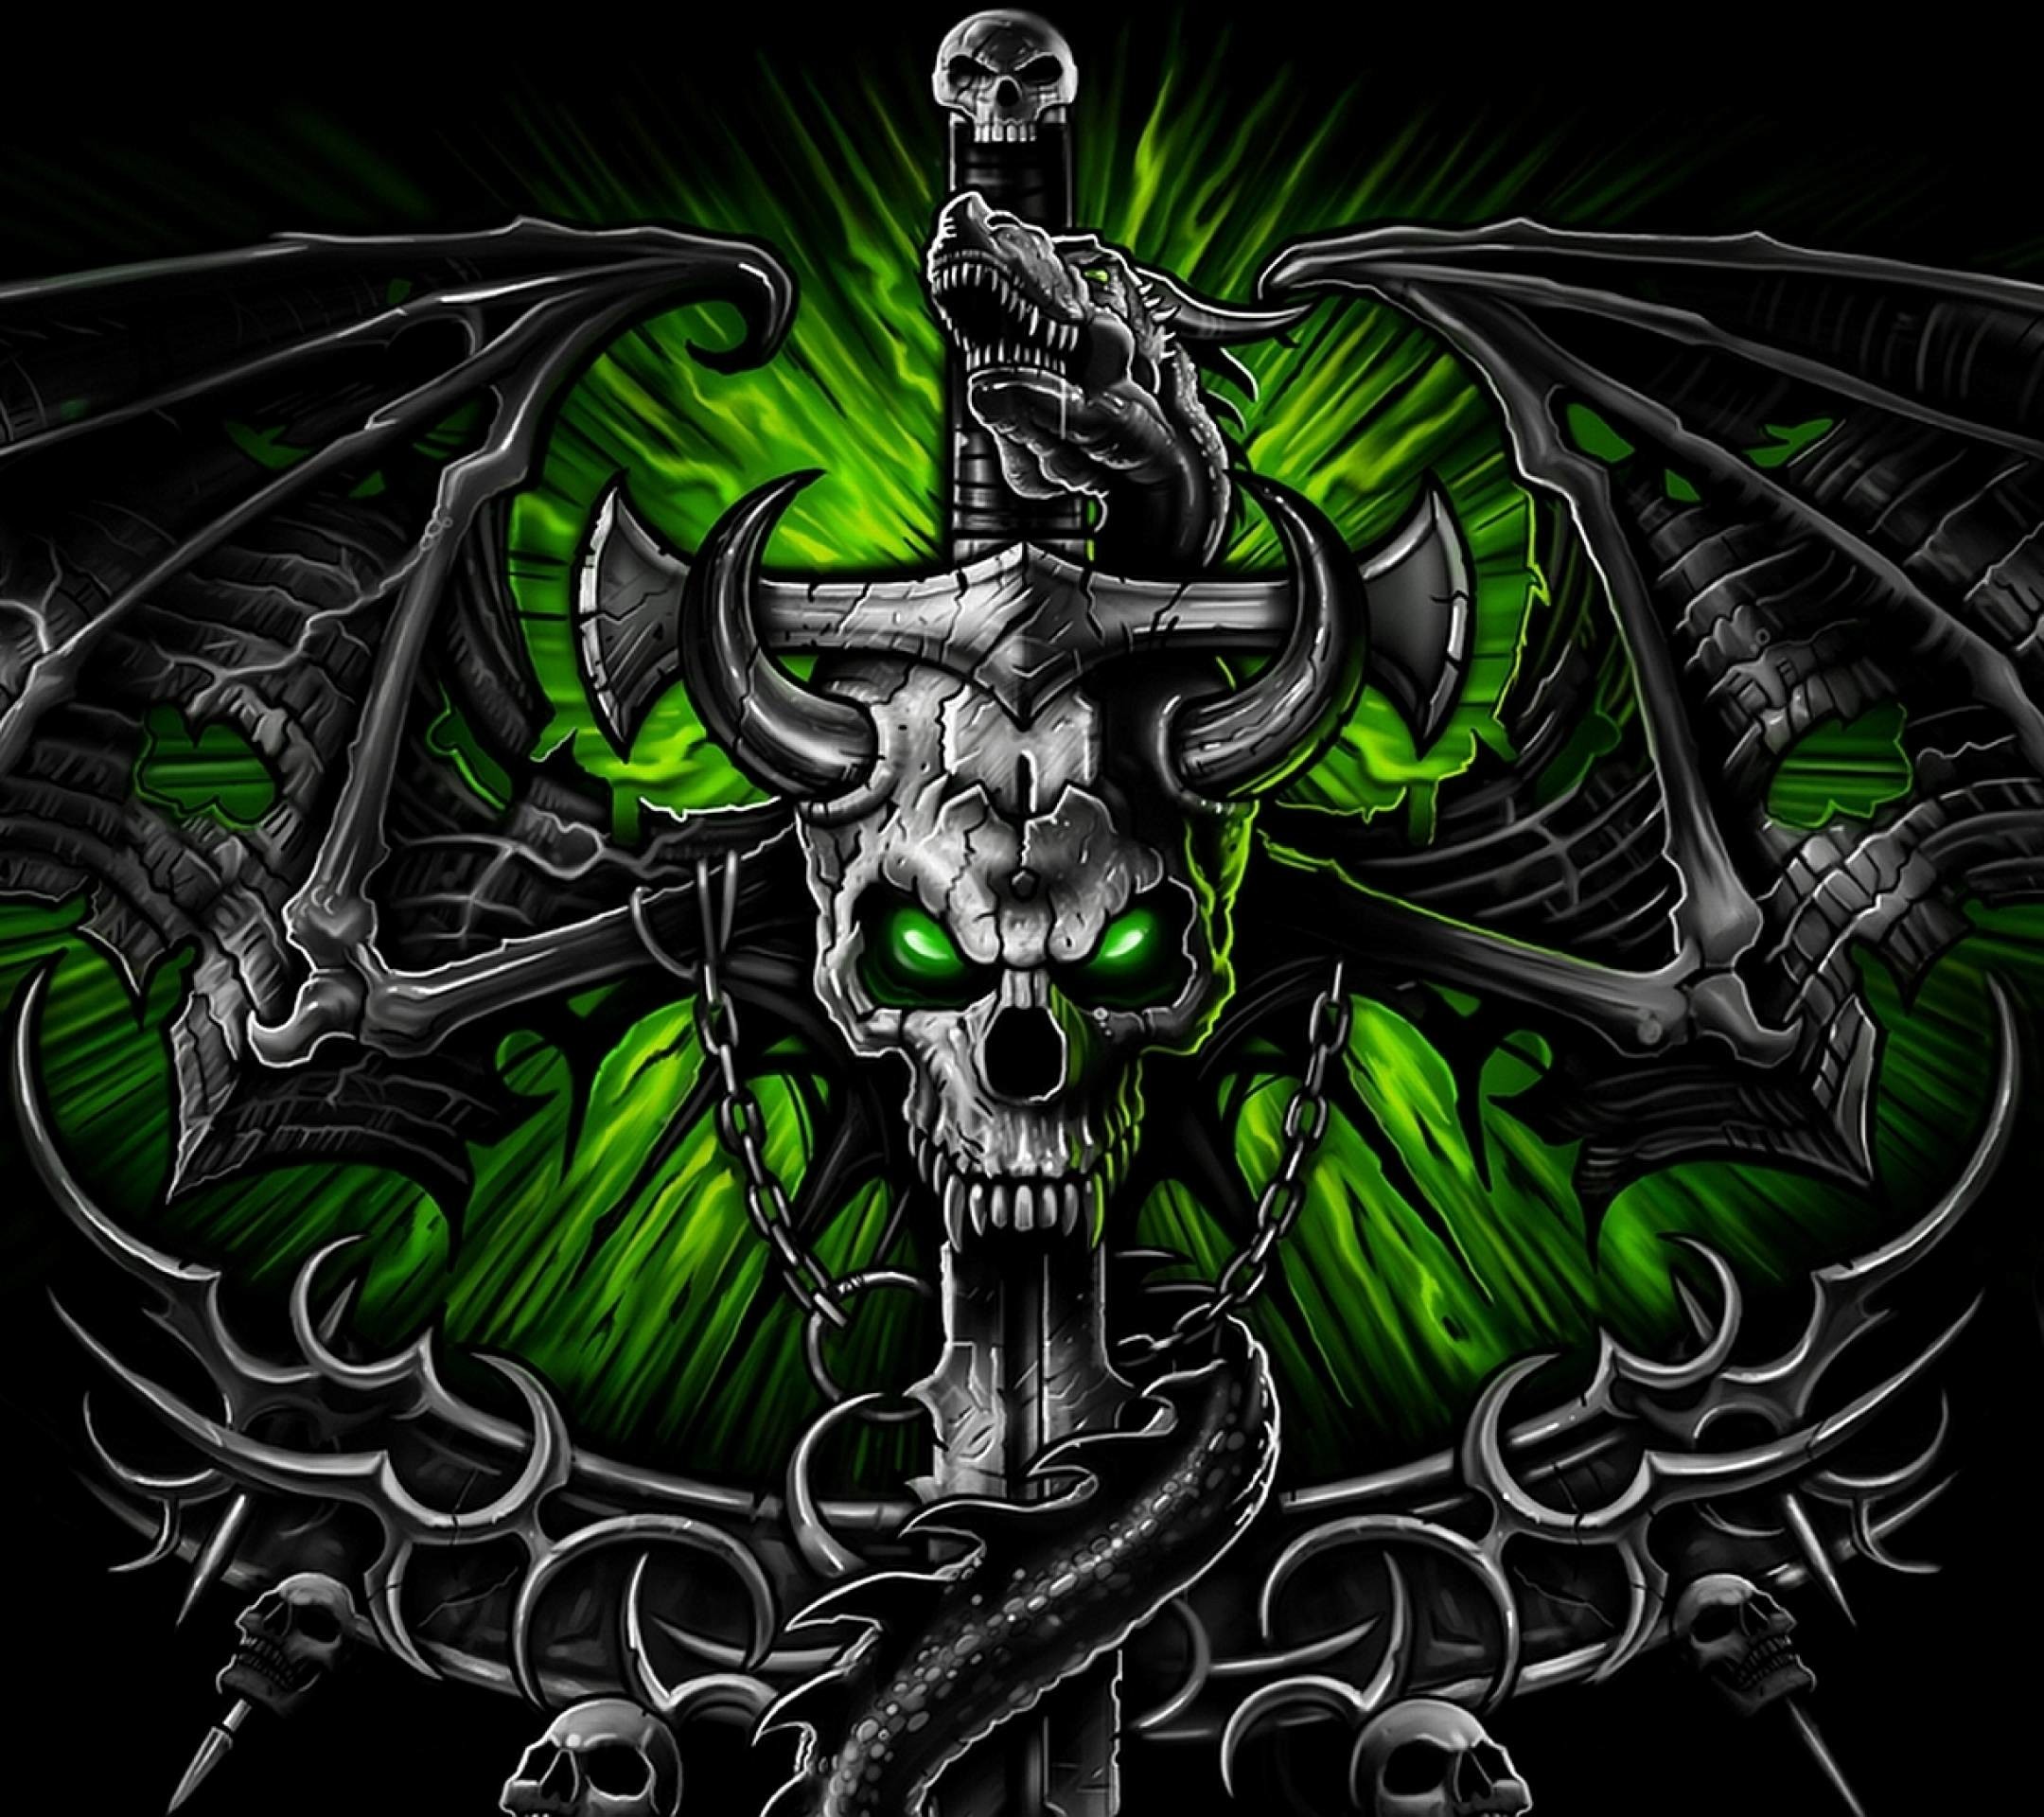 2160x1920 Search Results for “black and green skull wallpaper” – Adorable Wallpapers